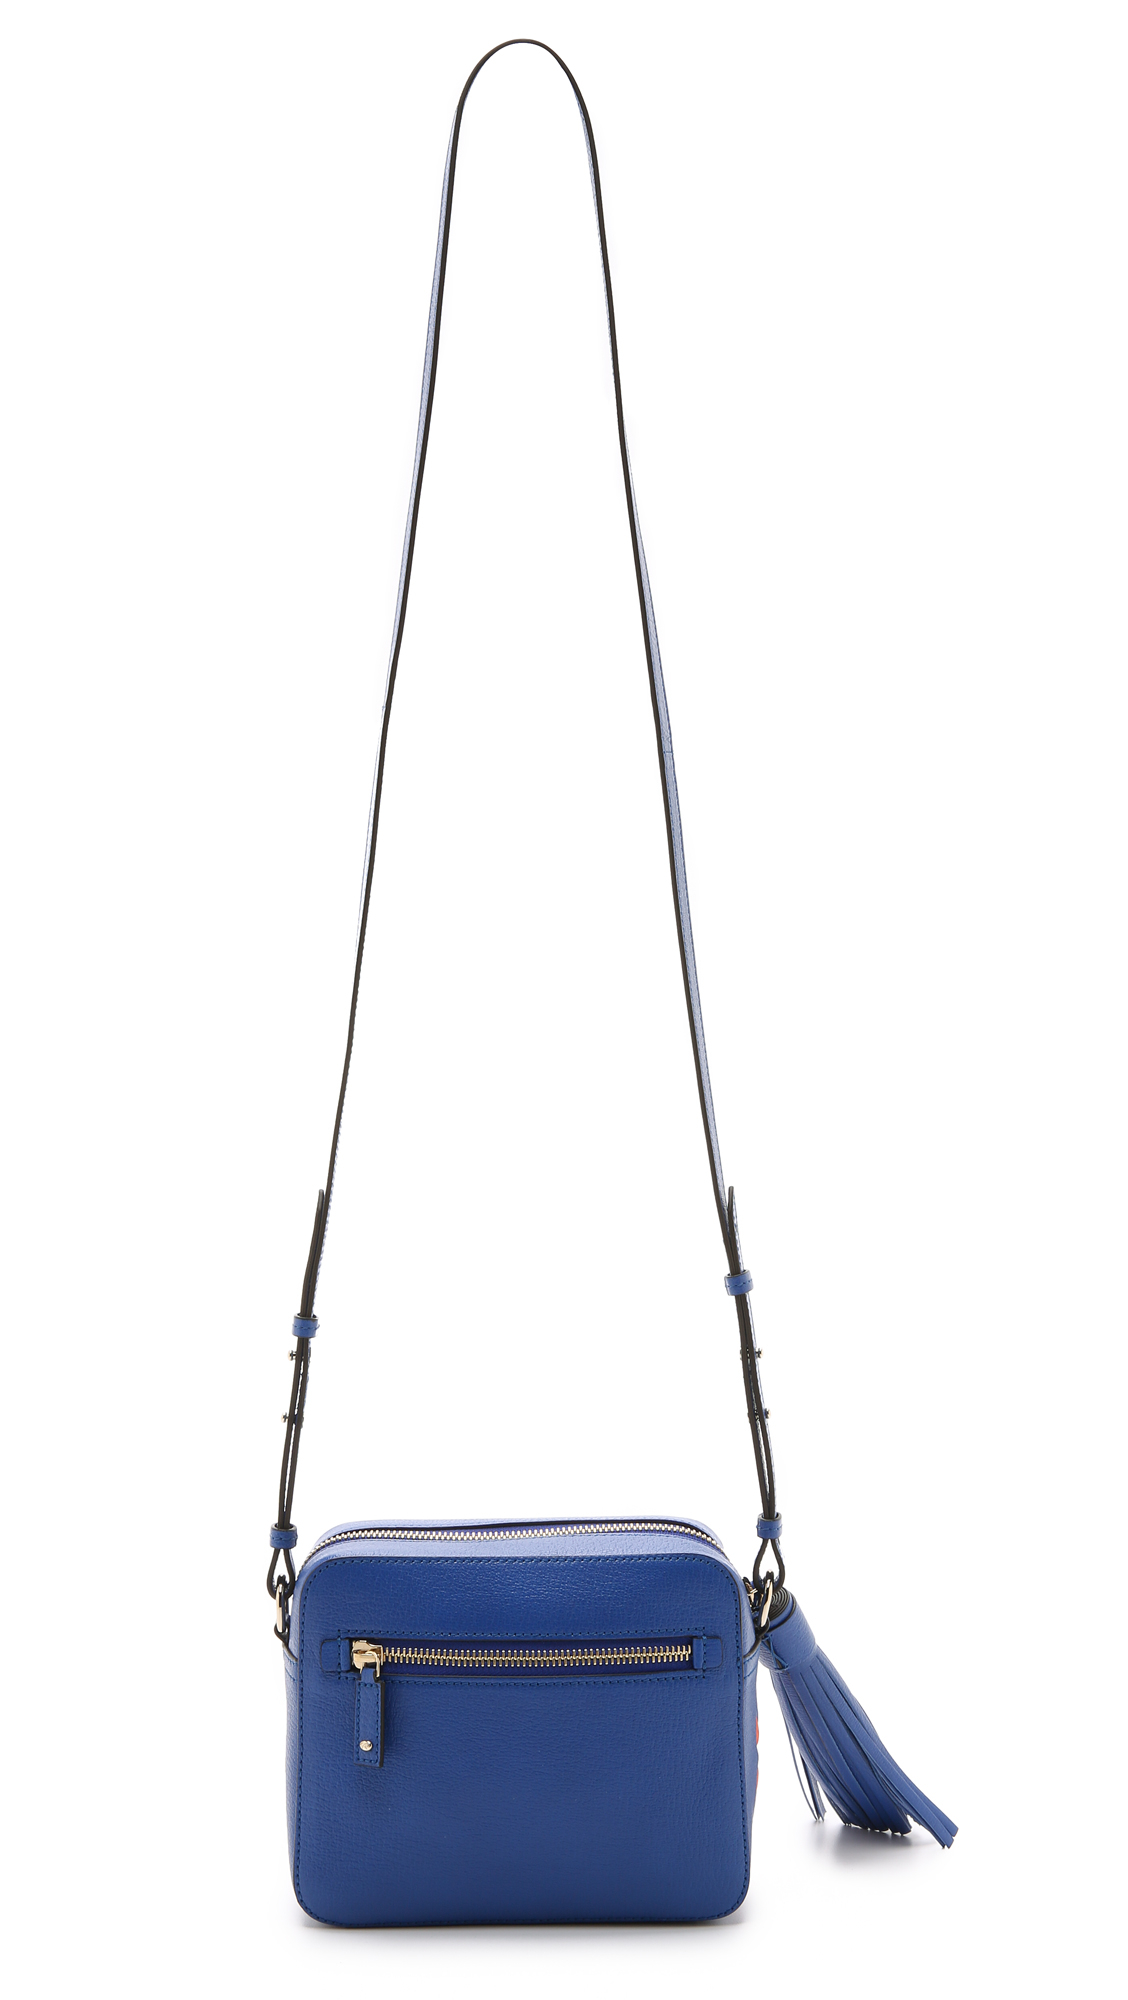 Anya hindmarch Frosties Cross Body Bag - Electric Blue in Blue | Lyst